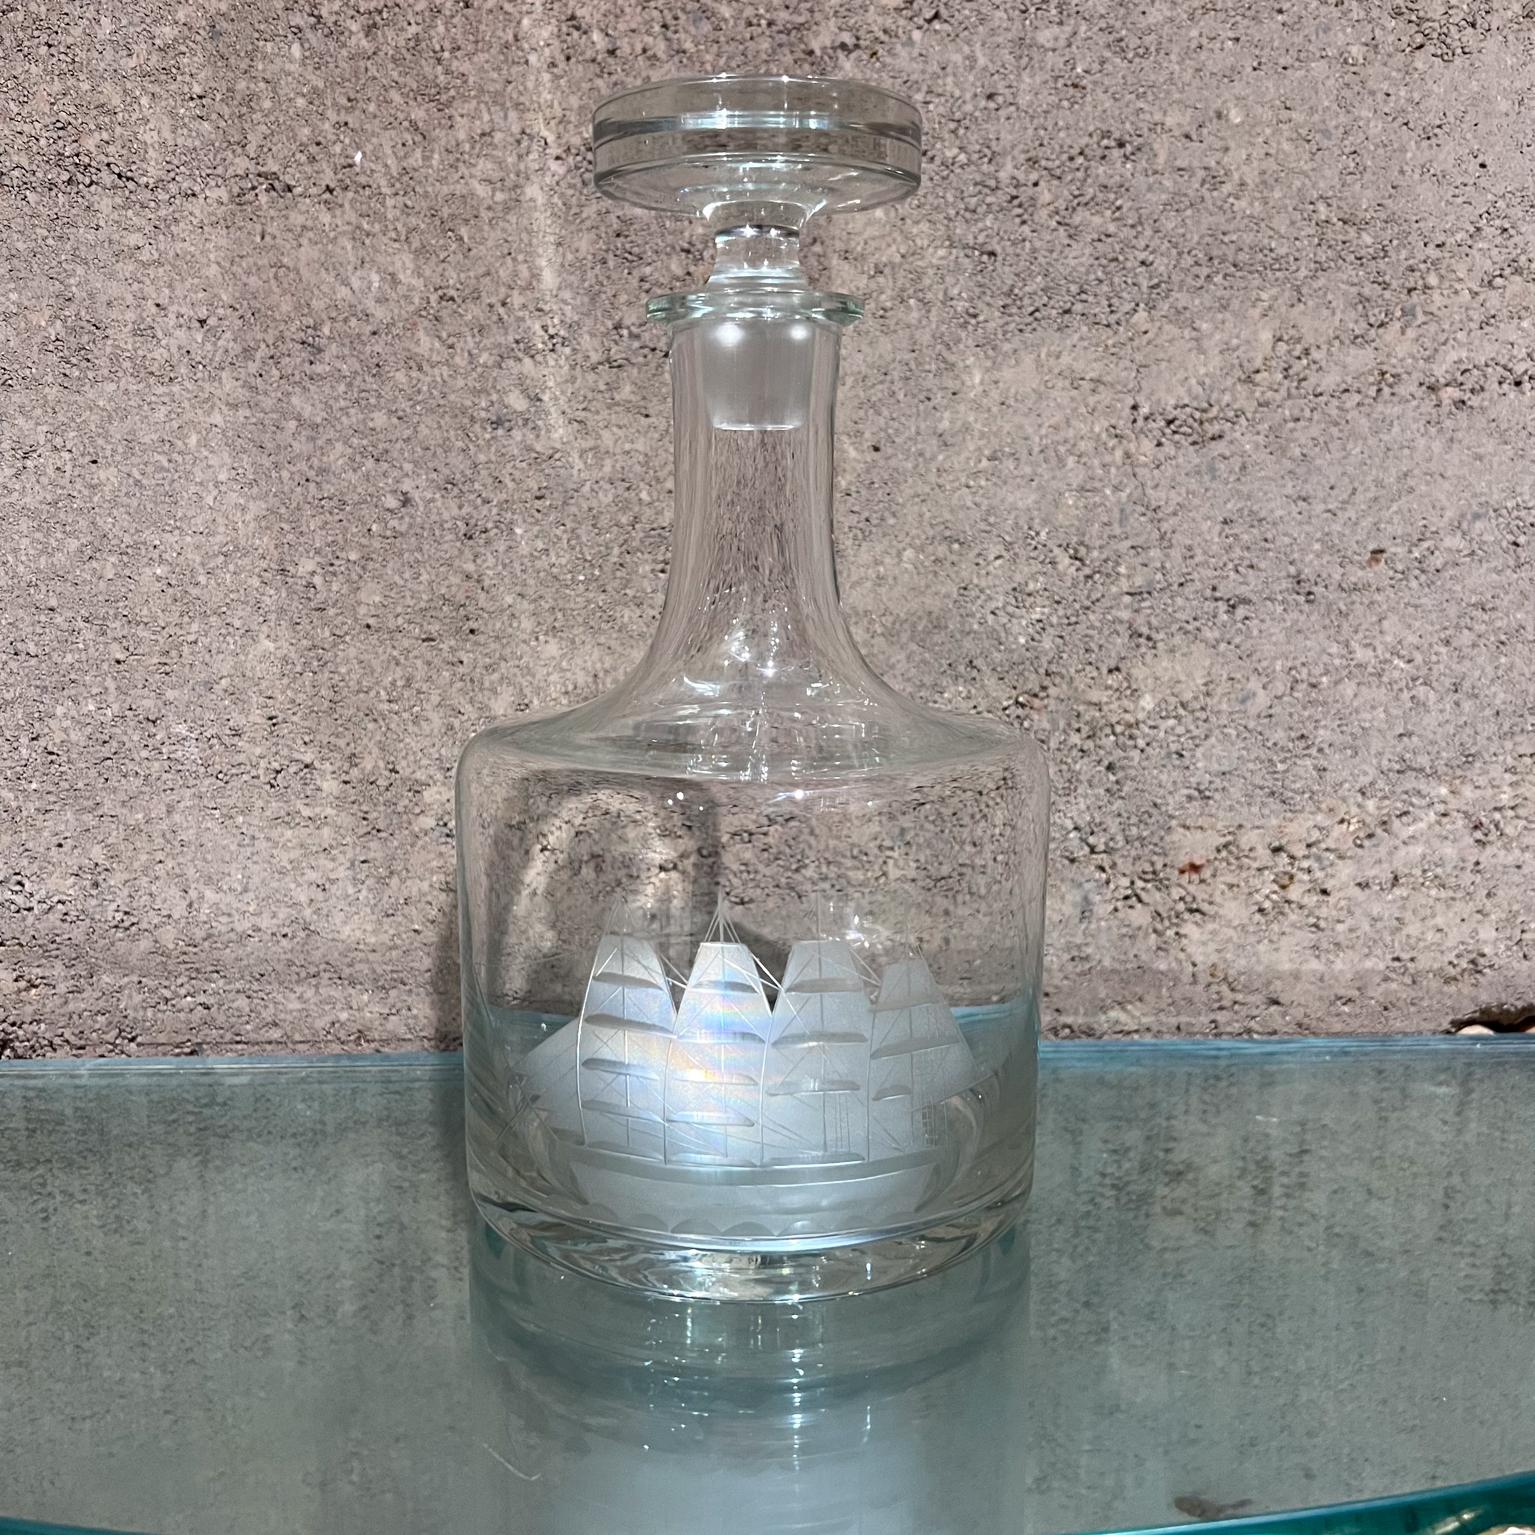 1970s Romania Etched Glass Decanter Clipper Sailboat
Tall 10.13 x 5.25 diameter
Clipper Sailboats Etched Glass 
Retains label made in Romania.
Original vintage condition like new.
Refer to images provided.